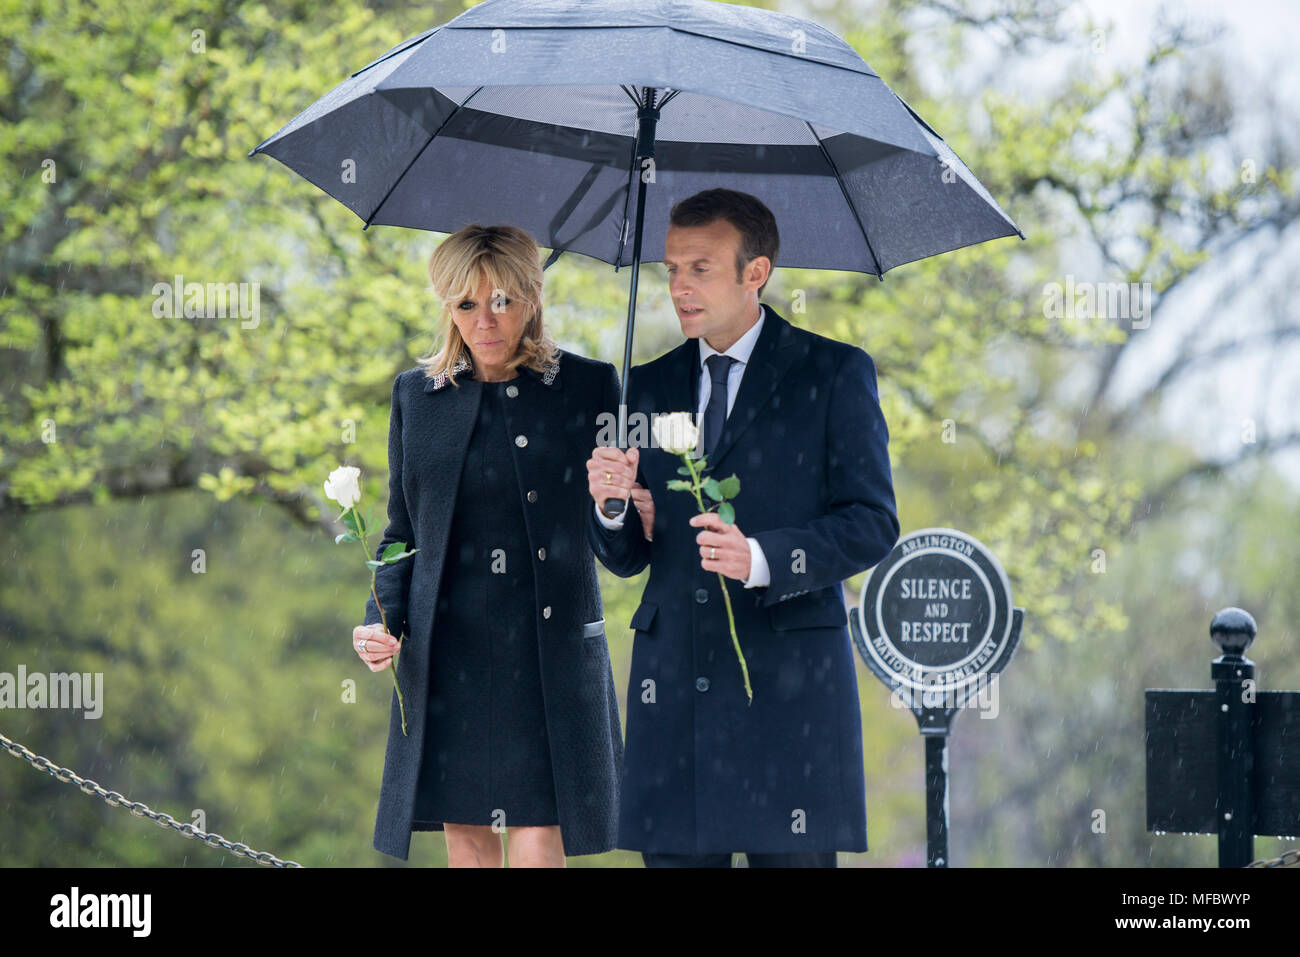 French President Emmanuel Macron and his wife, Brigitte Macron, lay roses on the gravesites of former President John F. Kennedy and Jacqueline Bouvier Kennedy Onassis at Arlington National Cemetery, Arlington, Virginia, April 24, 2018.  President Macron’s visit to Arlington National Cemetery was part of the first official State Visit from France since President Francois Hollande came to Washington in 2014. President Macron also laid a wreath at the Tomb of the Unknown Soldier as part of his visit. (U.S. Army photo by Elizabeth Fraser / Arlington National Cemetery / released) Stock Photo